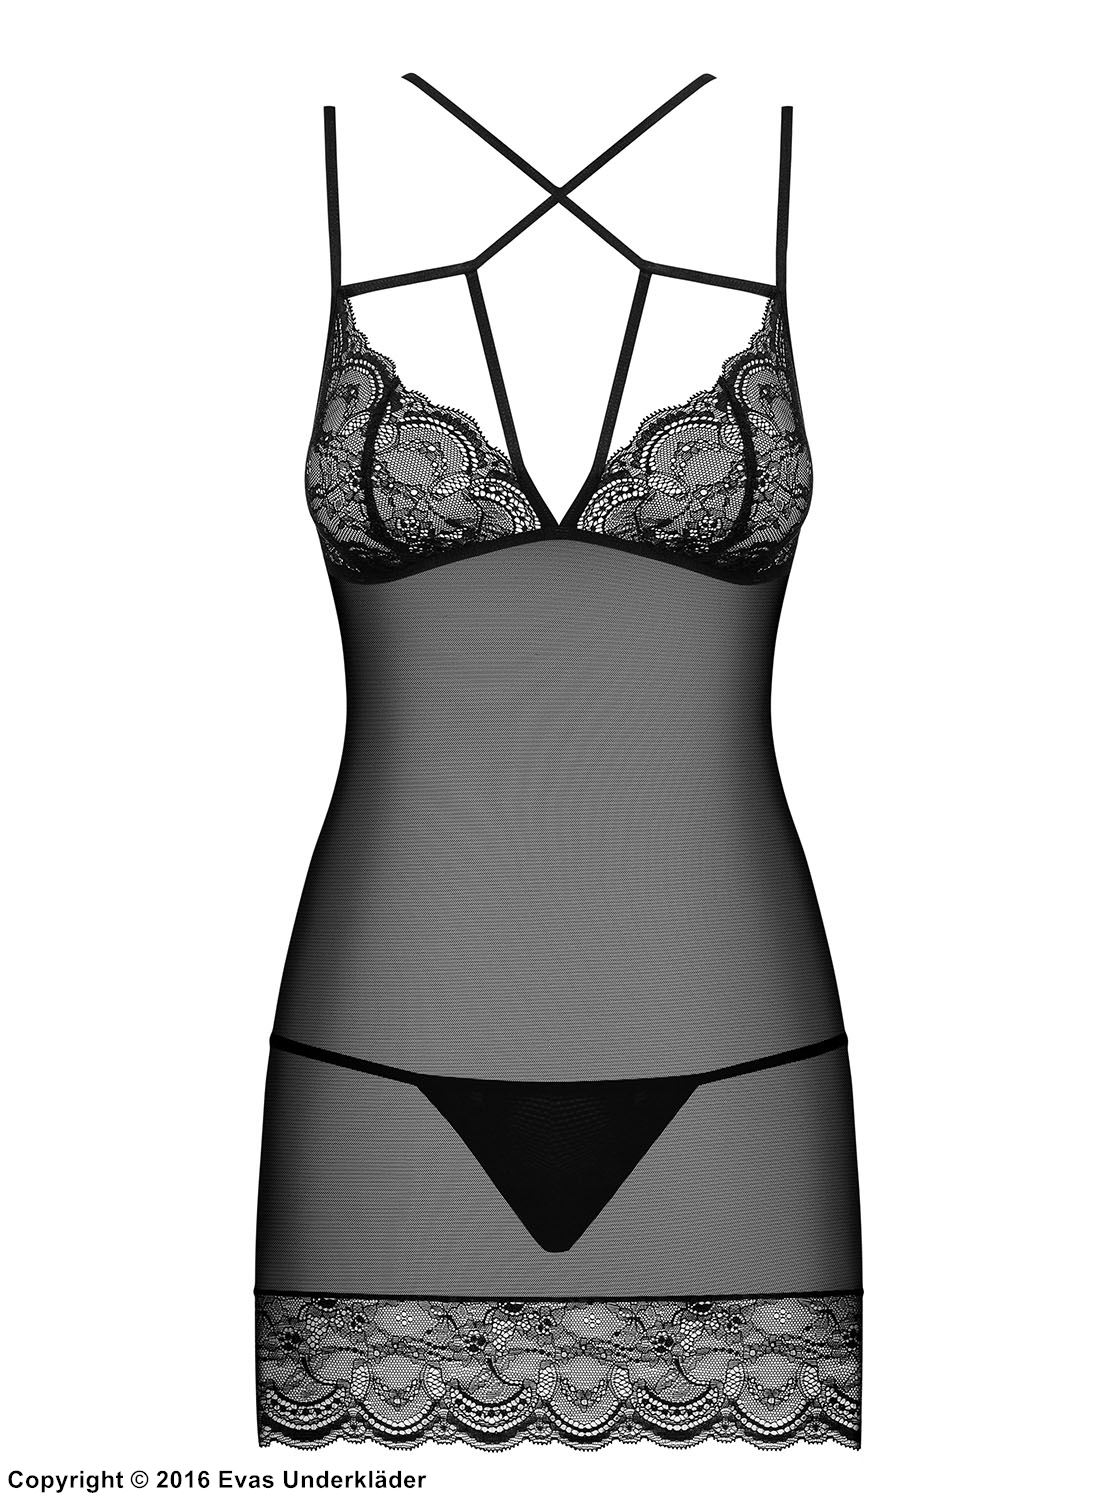 Seductive chemise, sheer mesh and lace, crossing straps